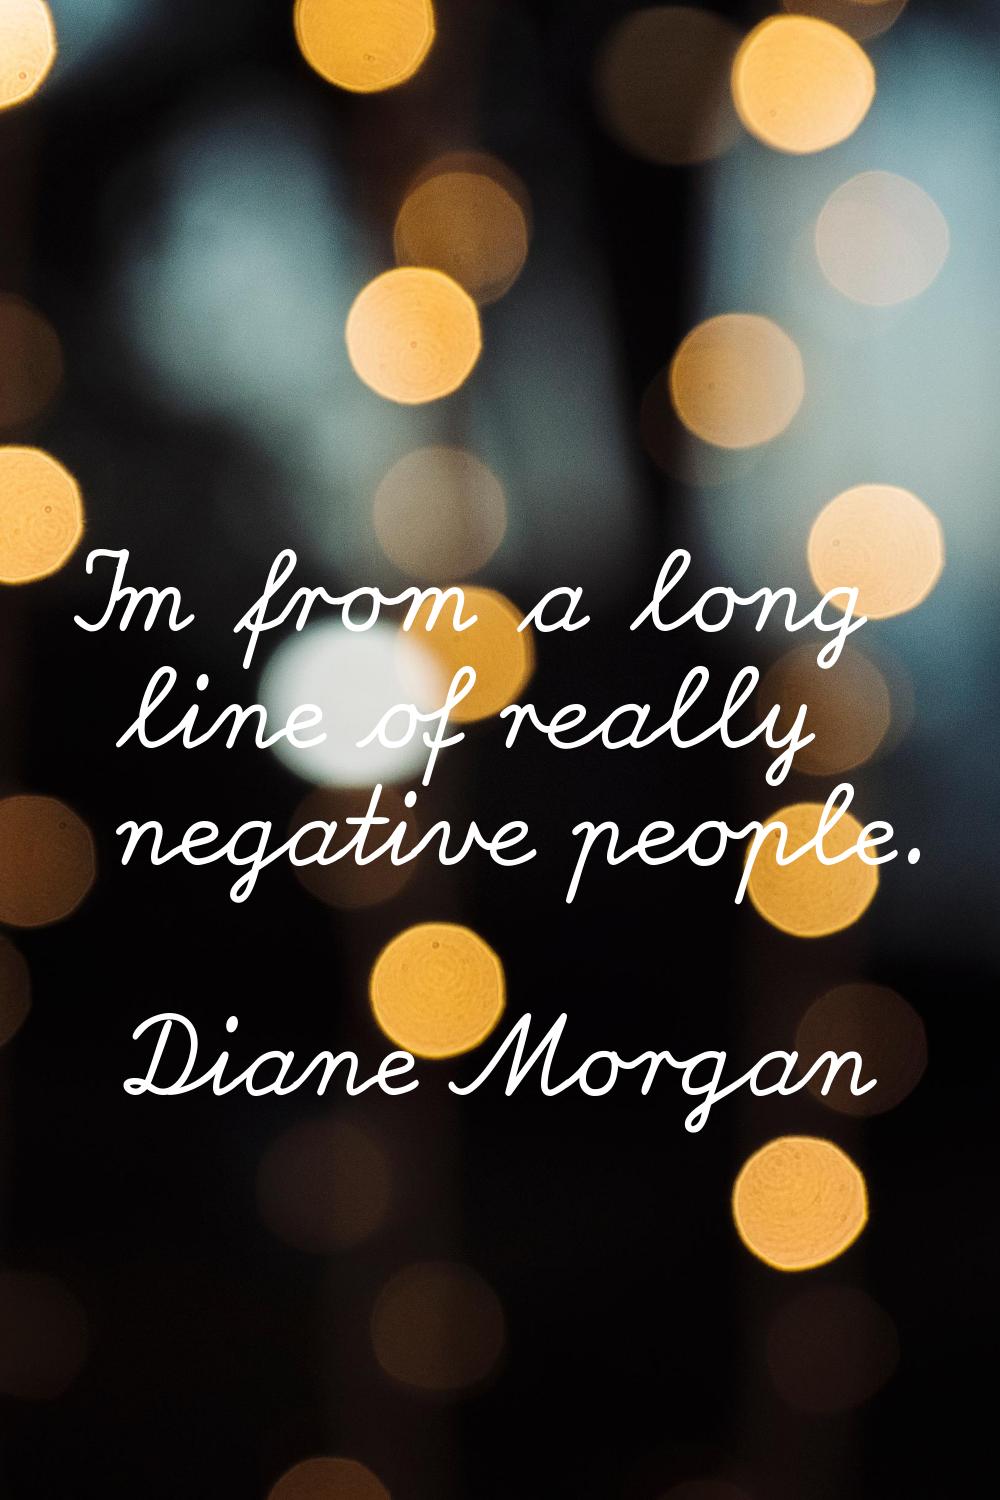 I'm from a long line of really negative people.